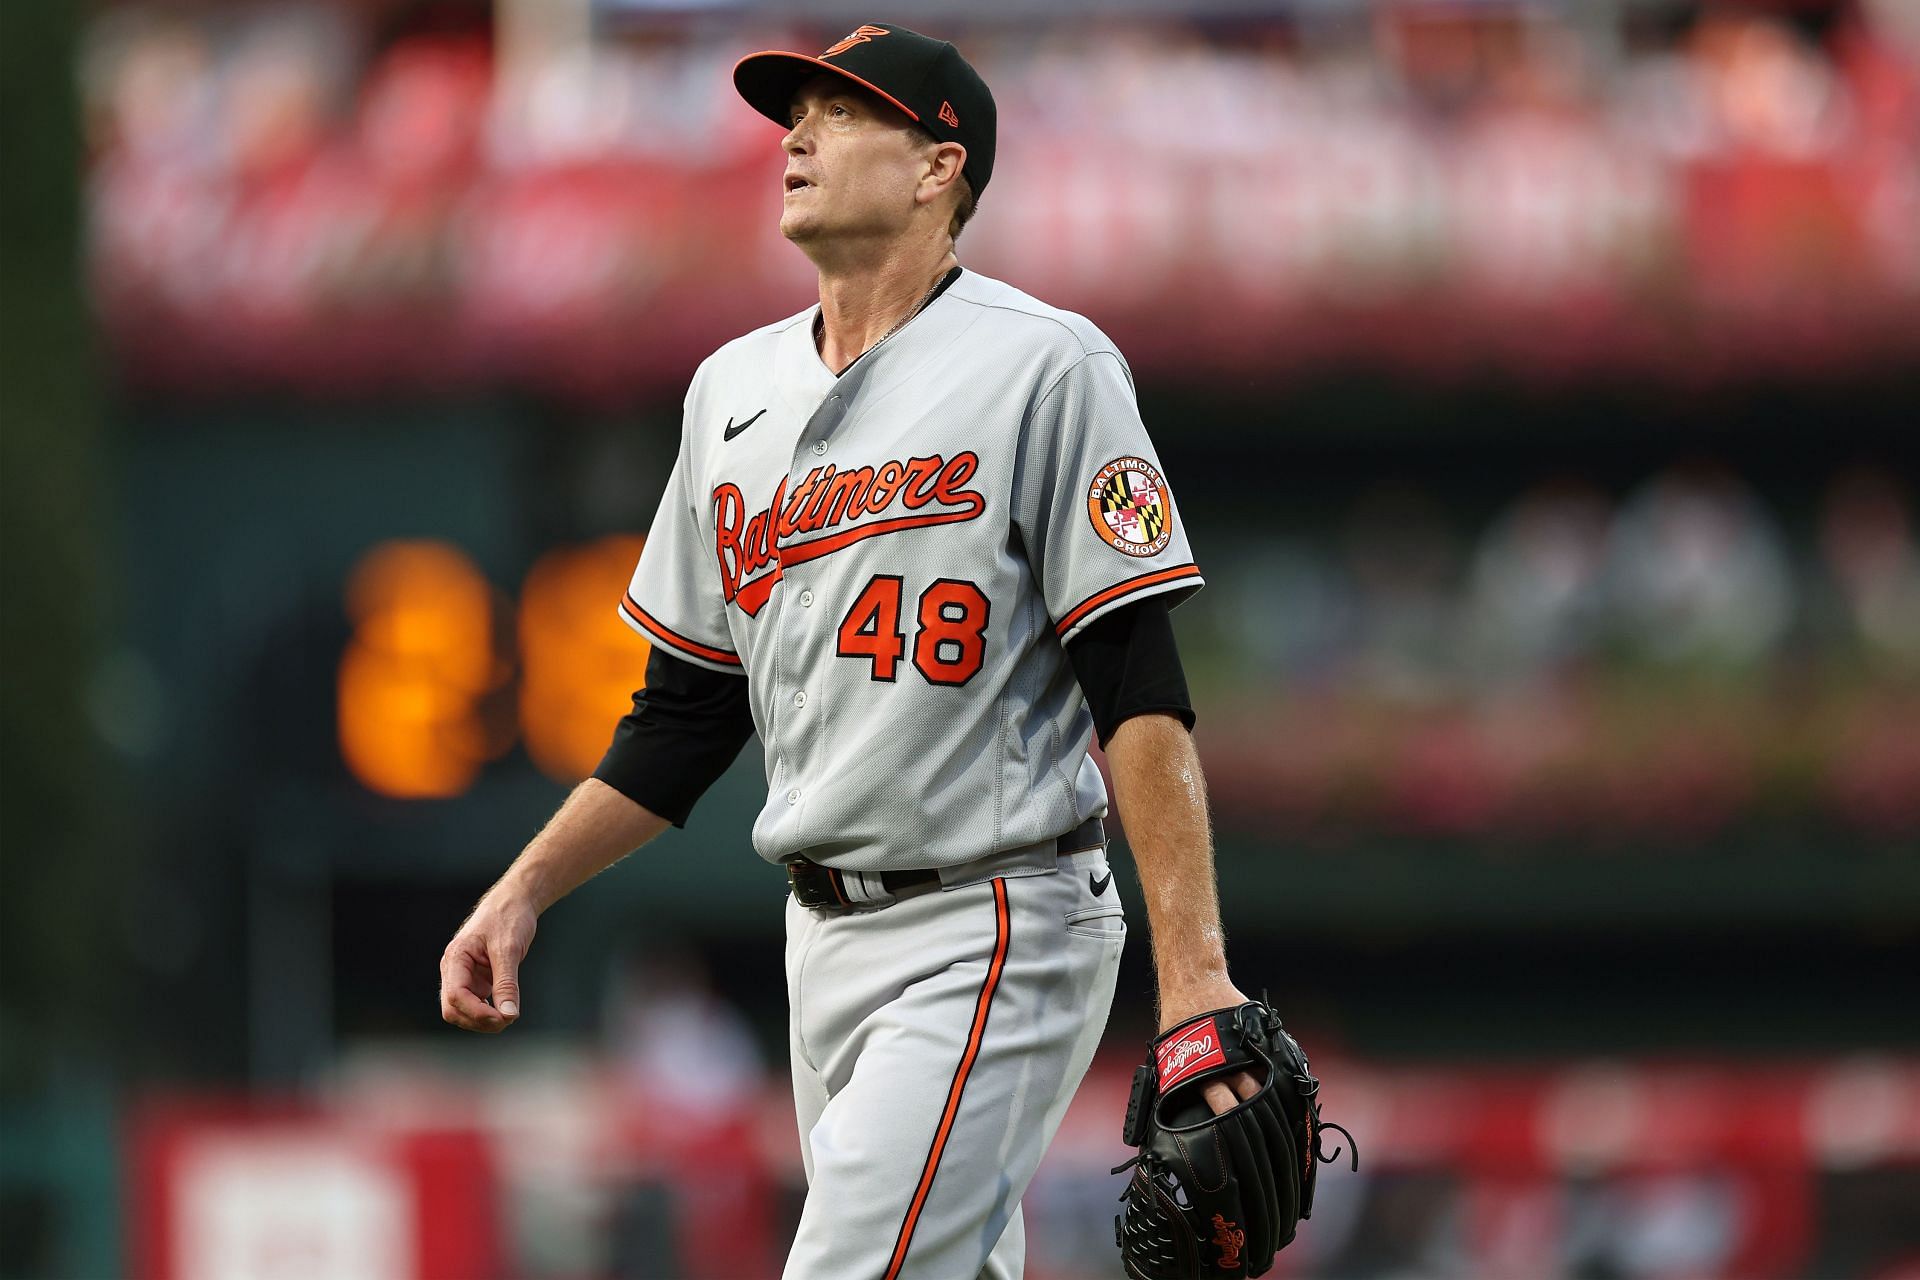 The Orioles signed Kyle Gibson to a one-year $10 million contract during the Winter Meetings in 2022.